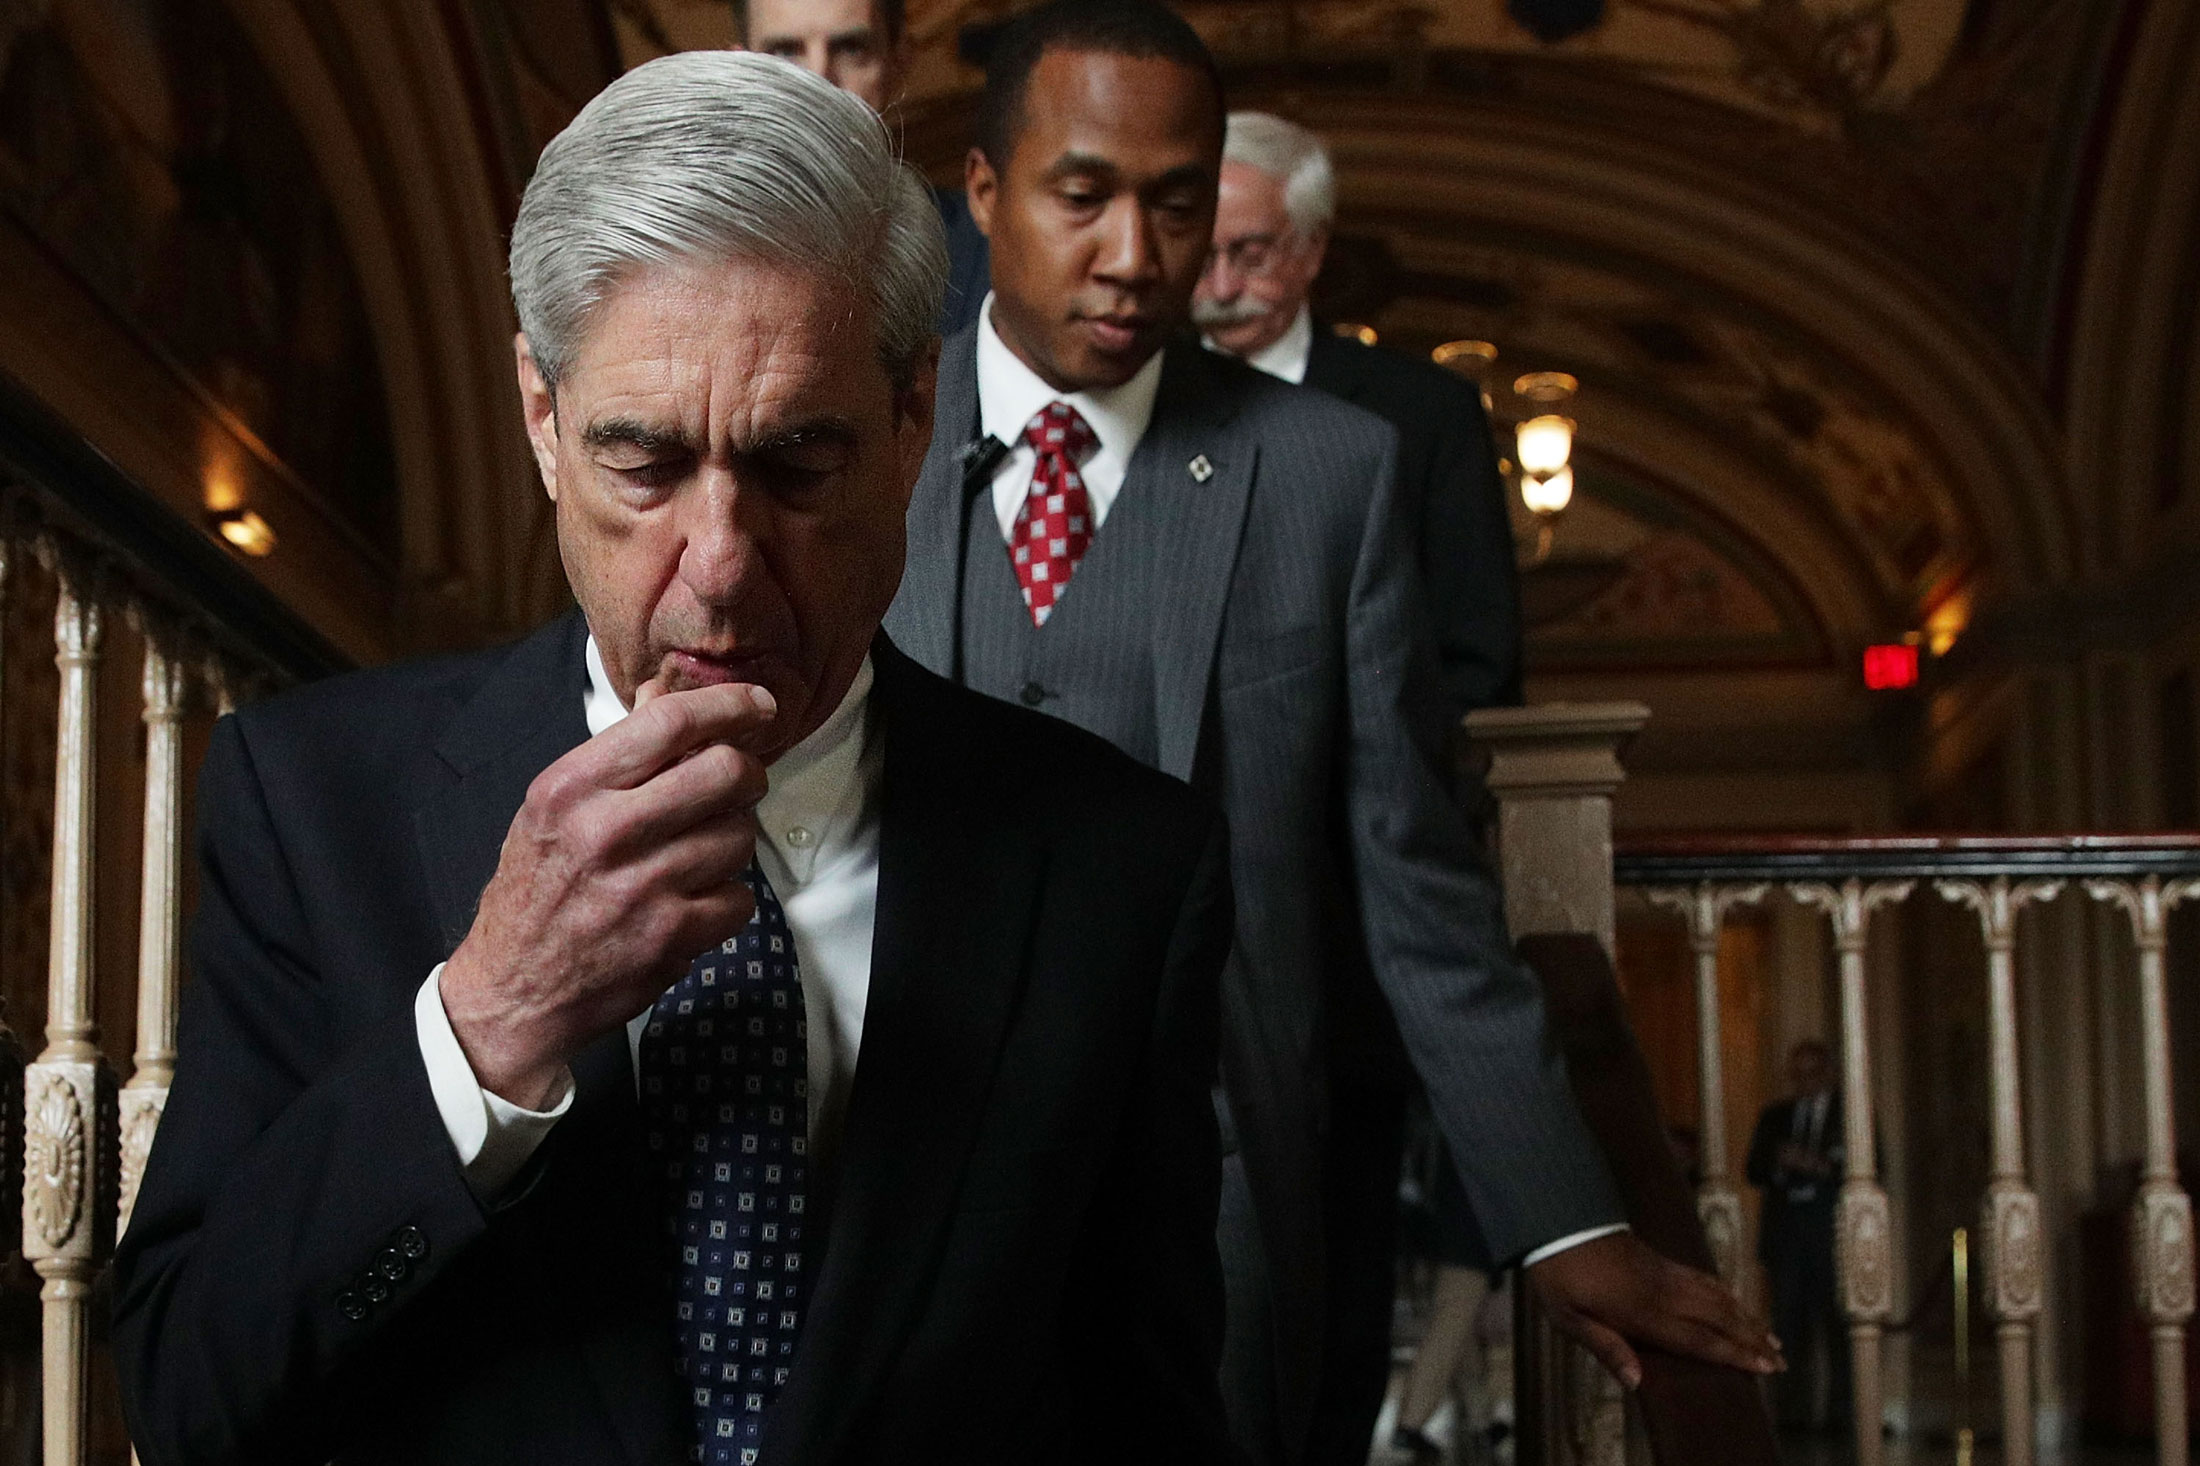 Mueller arriving at the Capitol for closed meetings in June.